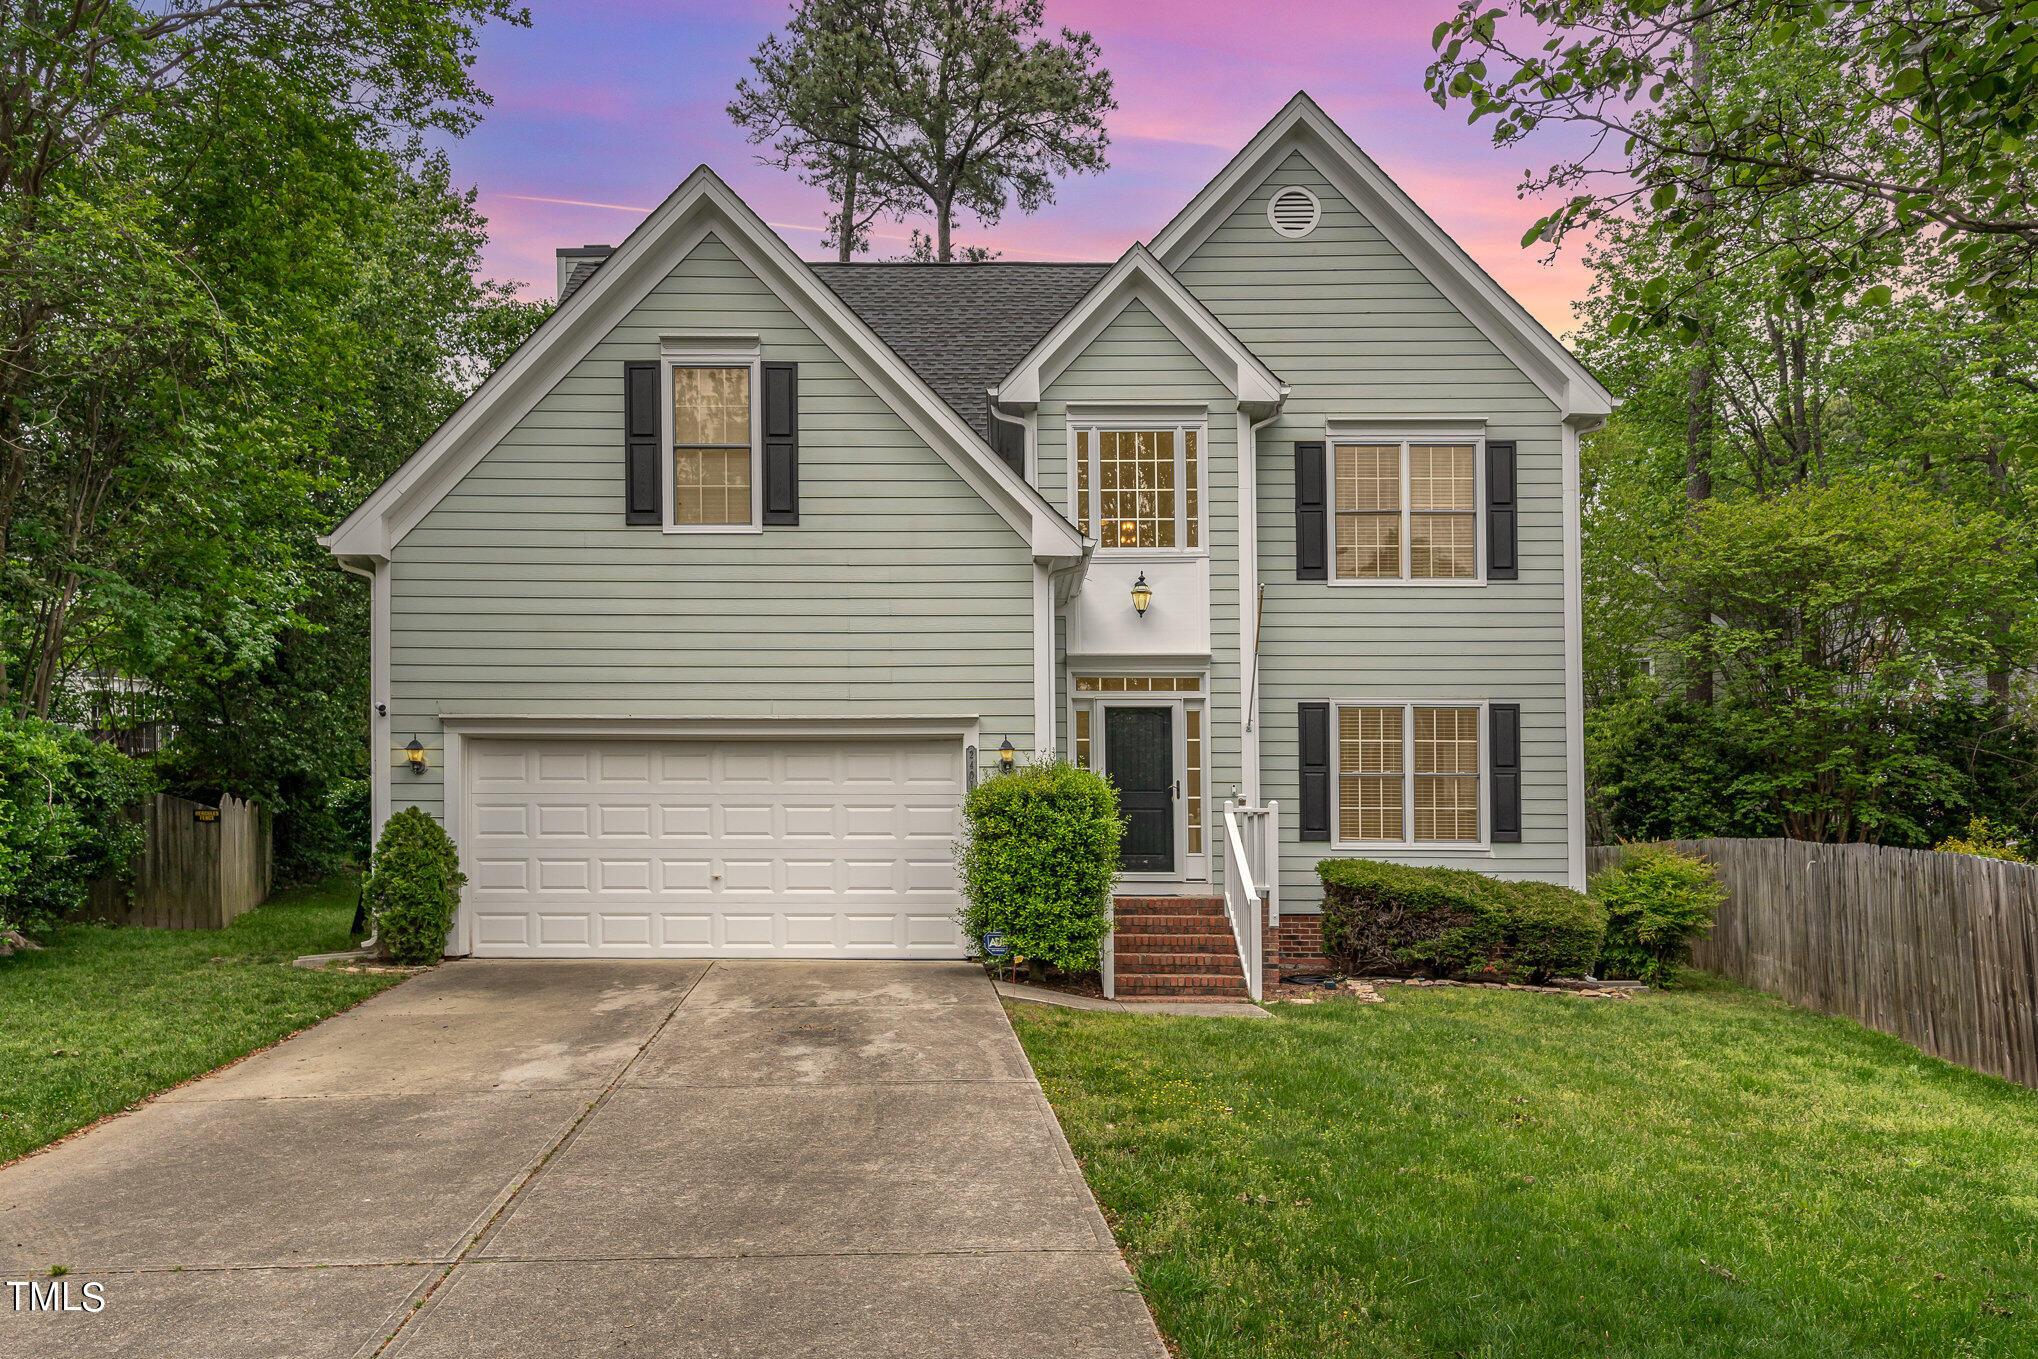 Photo one of 2401 Clerestory Pl Raleigh NC 27615 | MLS 10024732